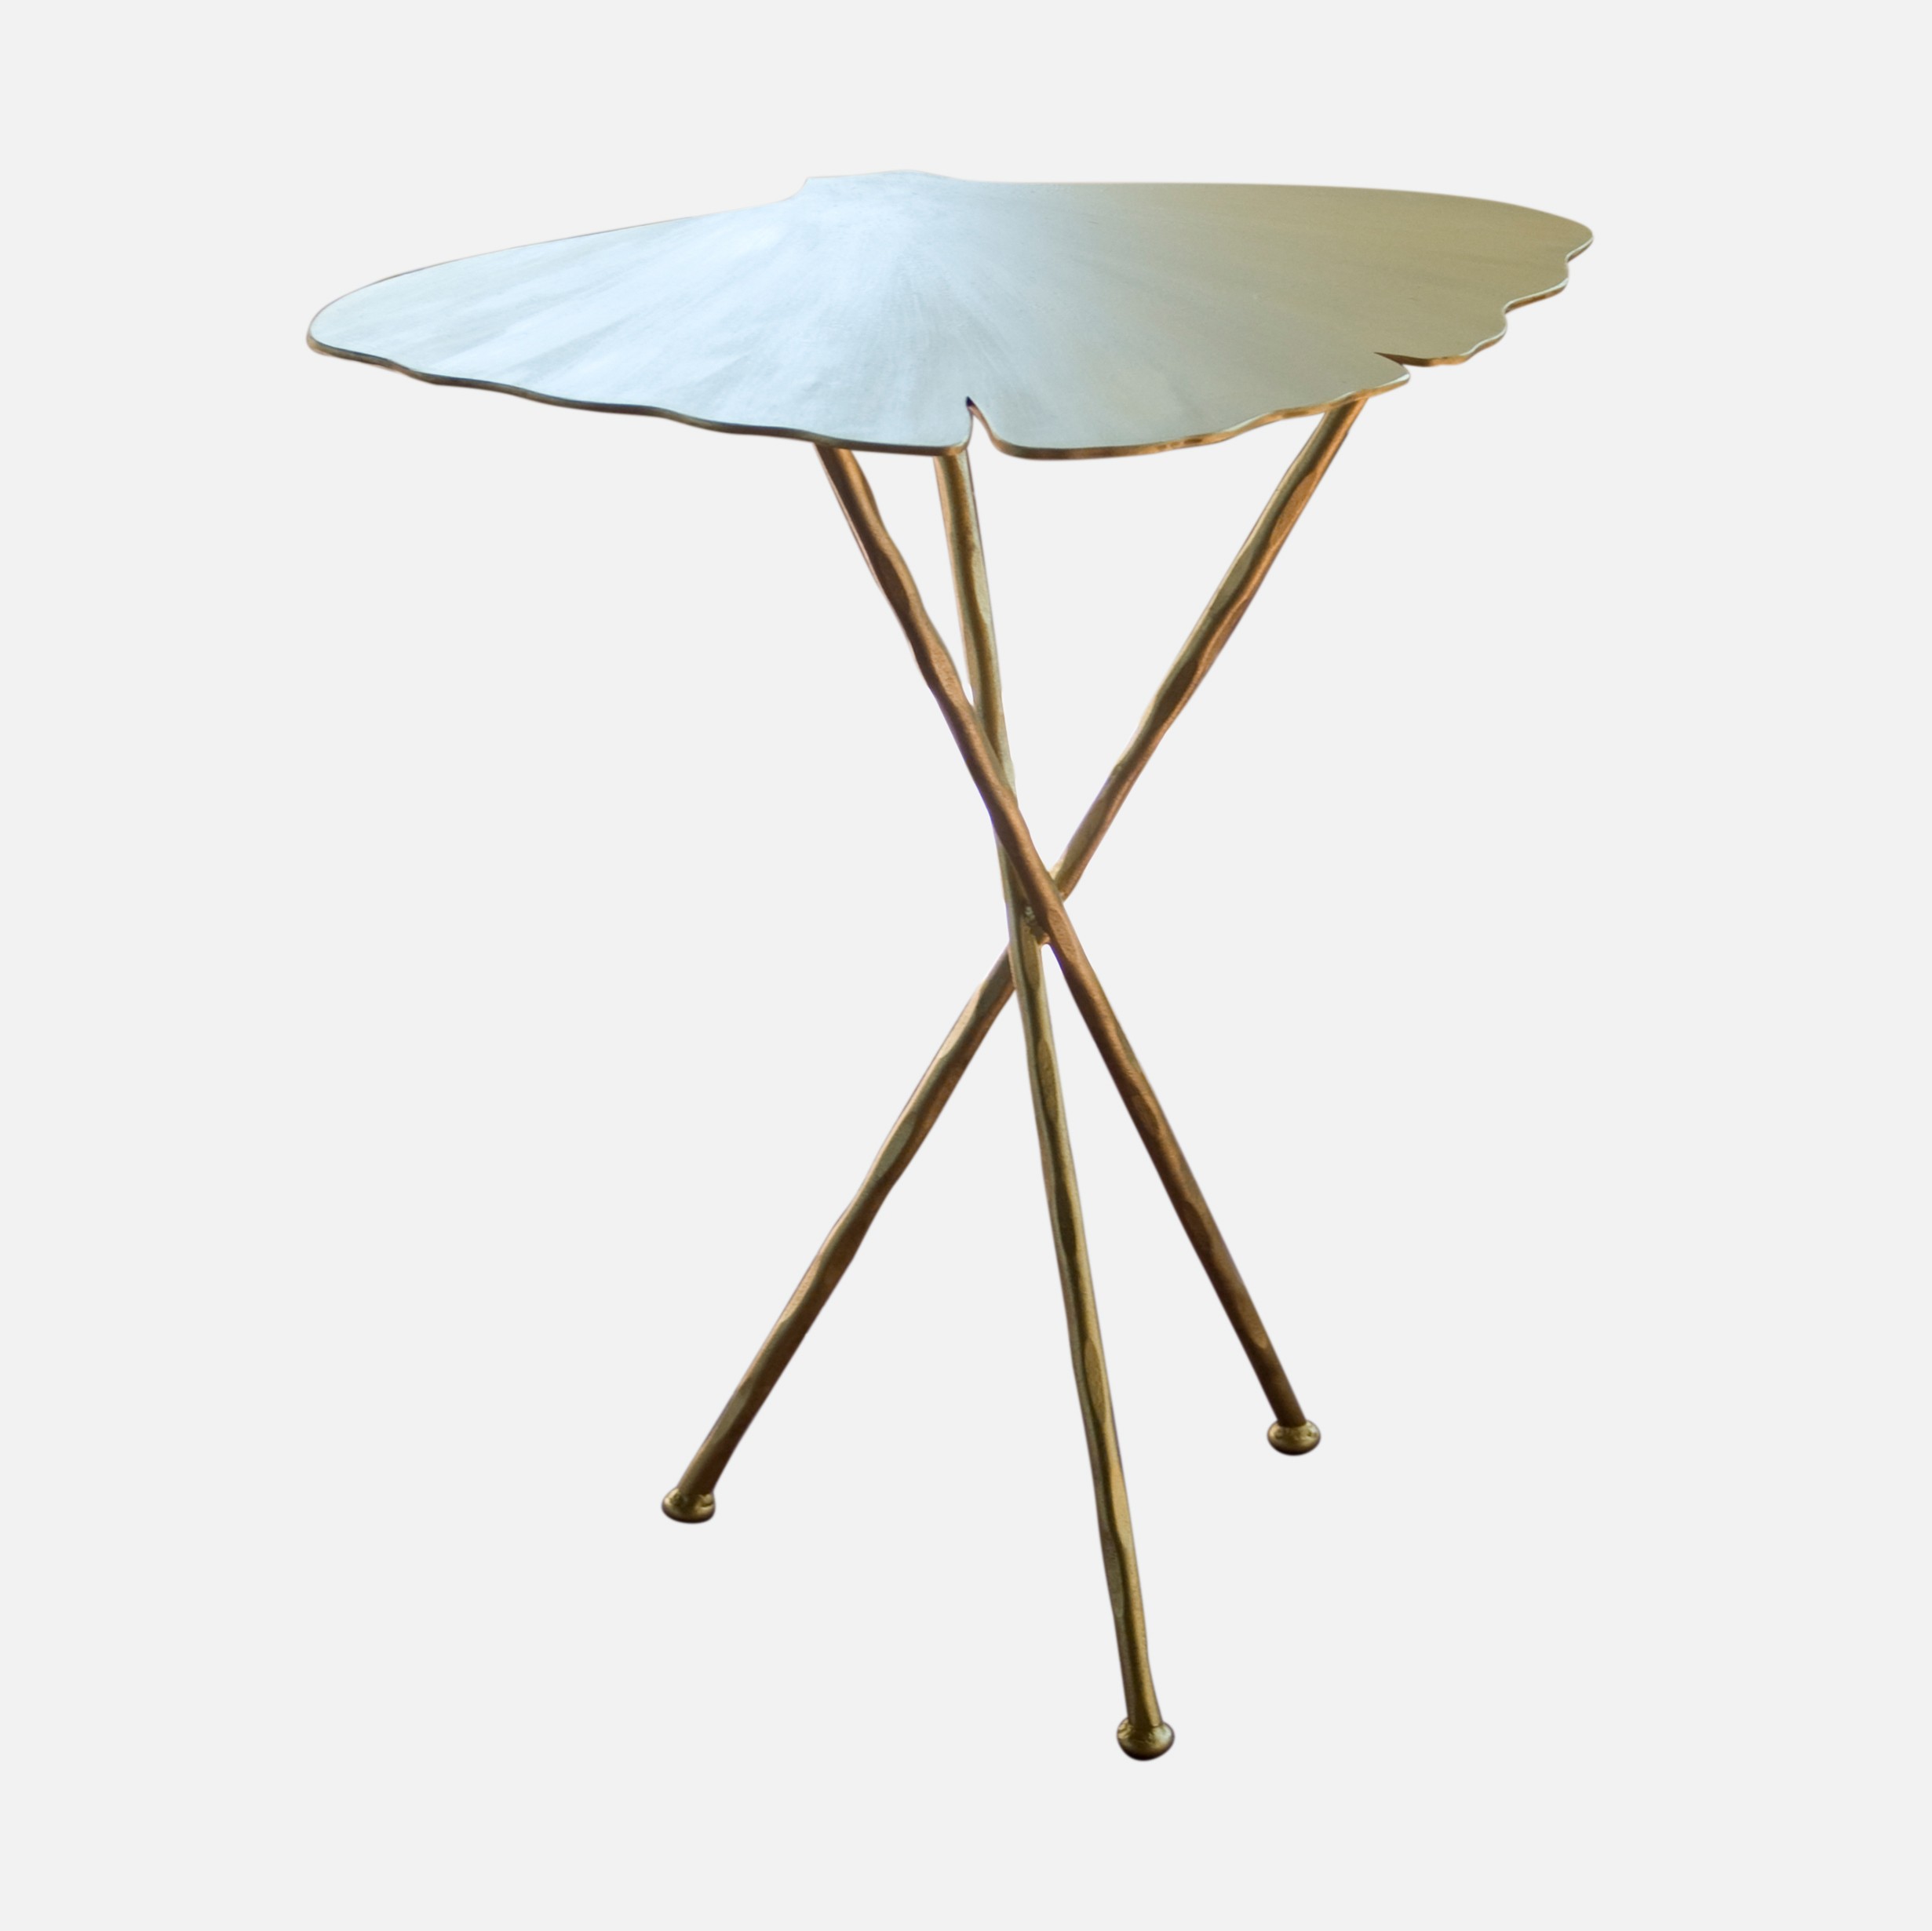 a metal table with a leaf shaped top